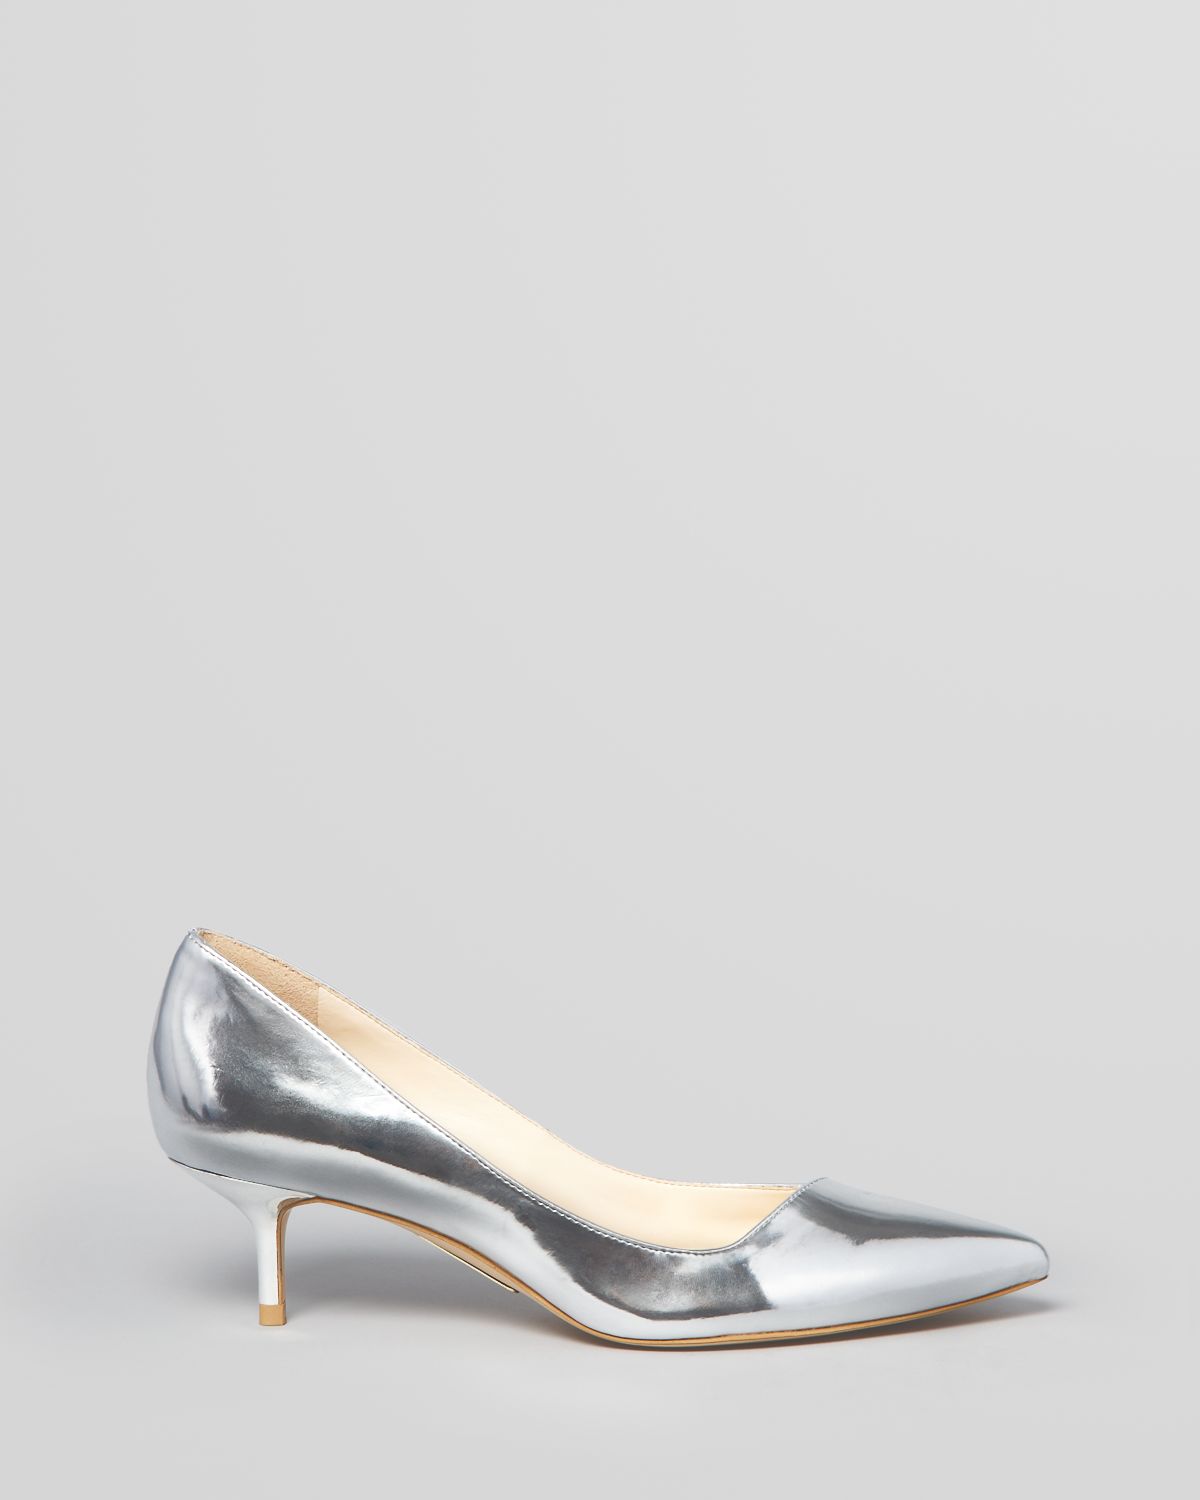 umoral køn sweater Boutique 9 Pointed Toe Pumps Sophina Kitten Heel in Pewter (Metallic) - Lyst